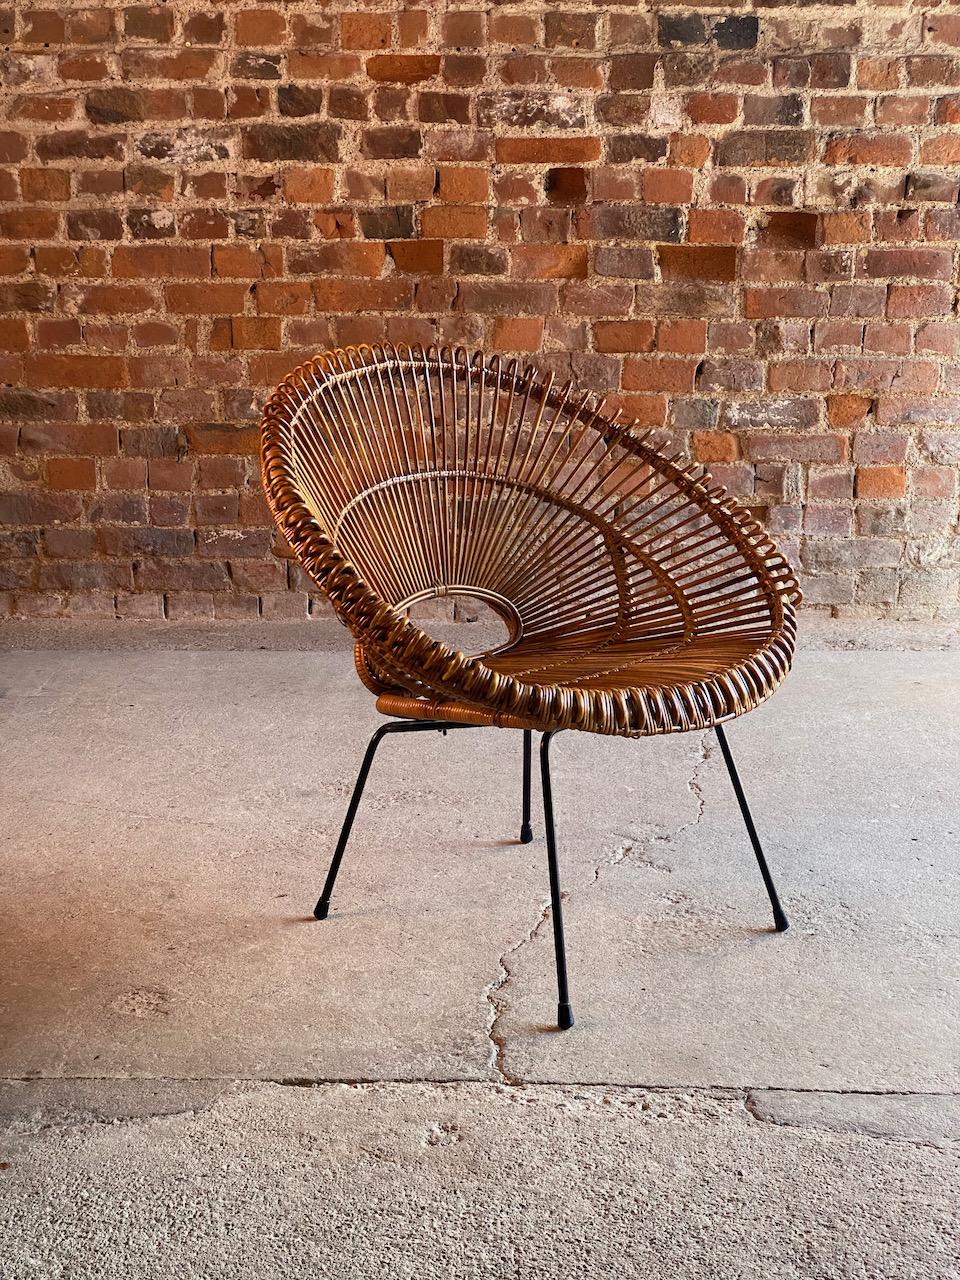 Solitaire Rattan chair by Janine Abraham & Dirk Jan Rol France circa 1950

Fabulous mid century French Solitaire Rattan Chair by Janine Abraham and Dirk Jan Rol France circa 1950s, the beautiful sunburst design with its deep bucket seat with